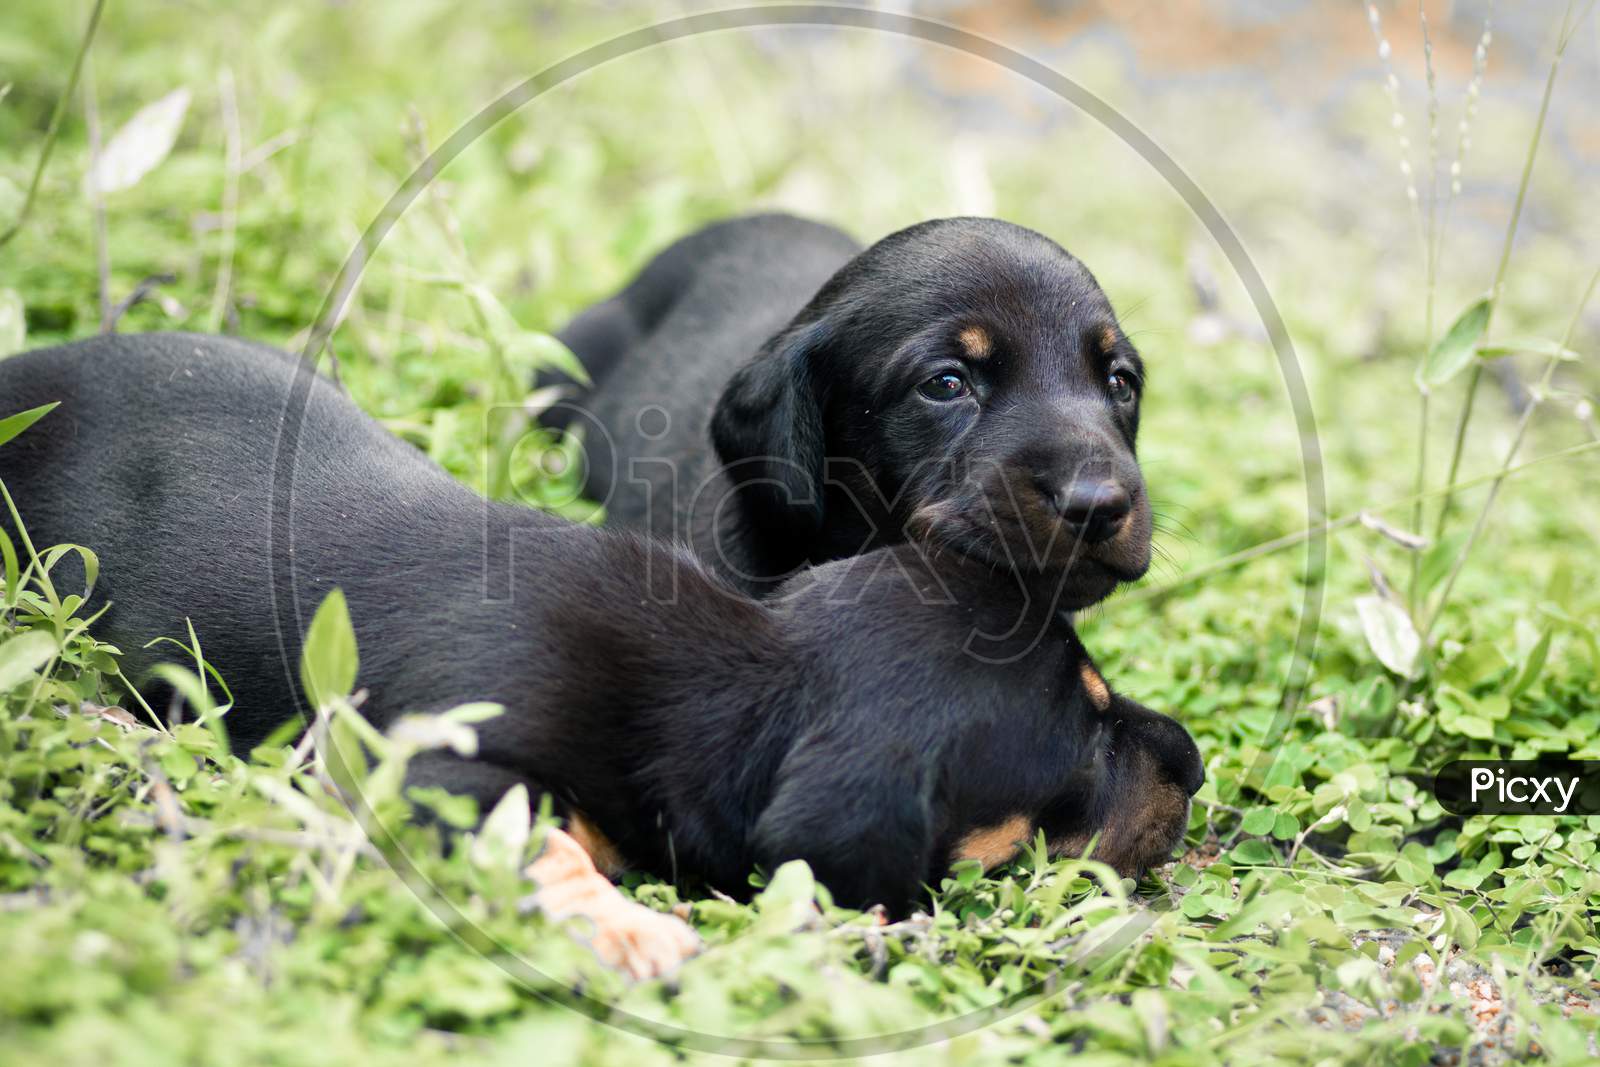 Cute Dachshund Puppies Lying In The Backyard, Cuddle And Play With Newborn Siblings, Explore, Watch And Learn The Environment, Taking Care Each Other Concept, Family Stays Together. Fluffy Pups Image